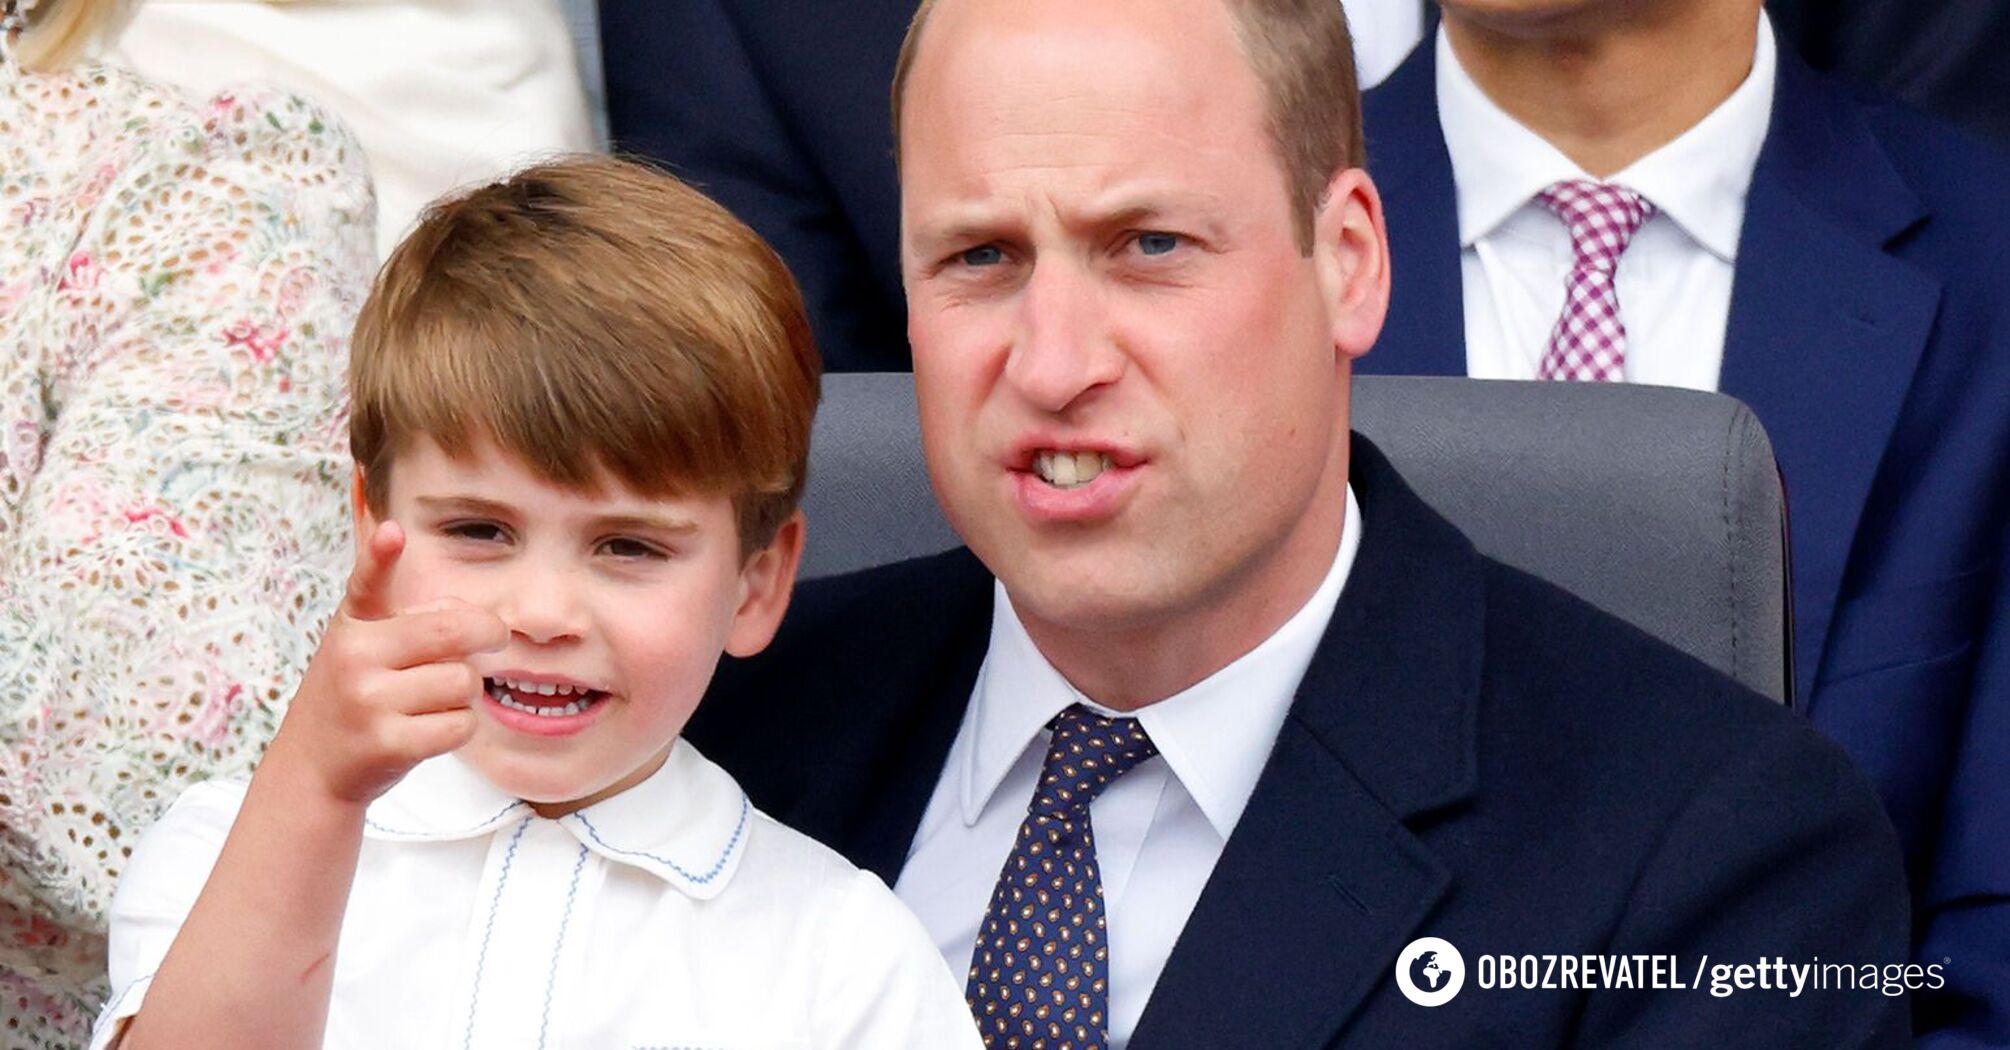 Daddy's son! The network compared the 'wild dances' of Prince William and little Louis: the similarity of movements is striking